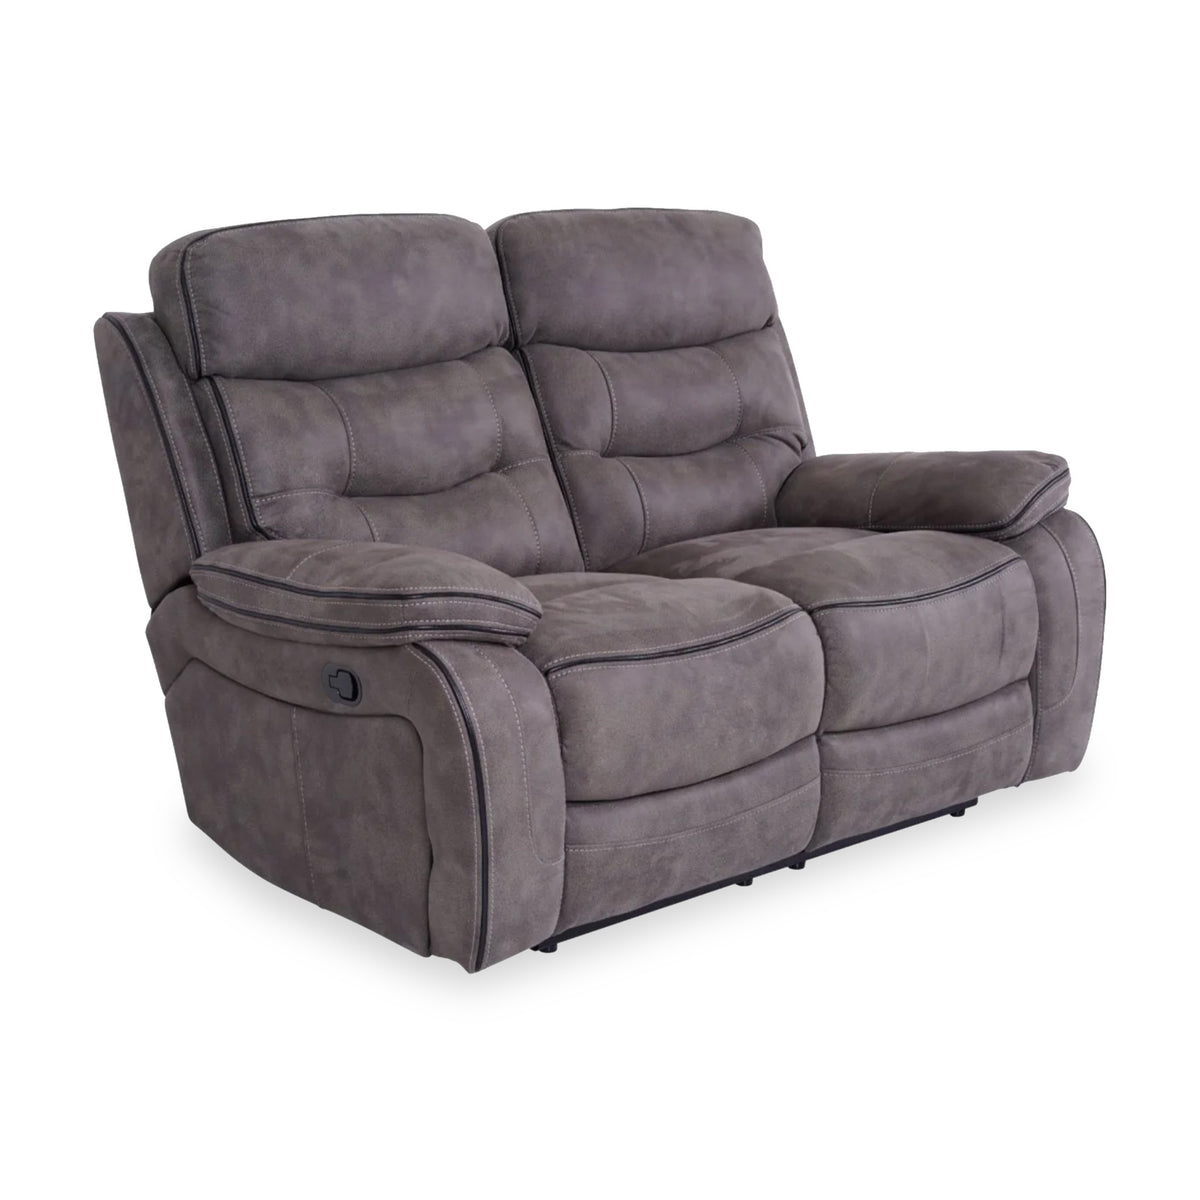 Stanford Reclining 2 Seater Sofa from Roseland Furniture